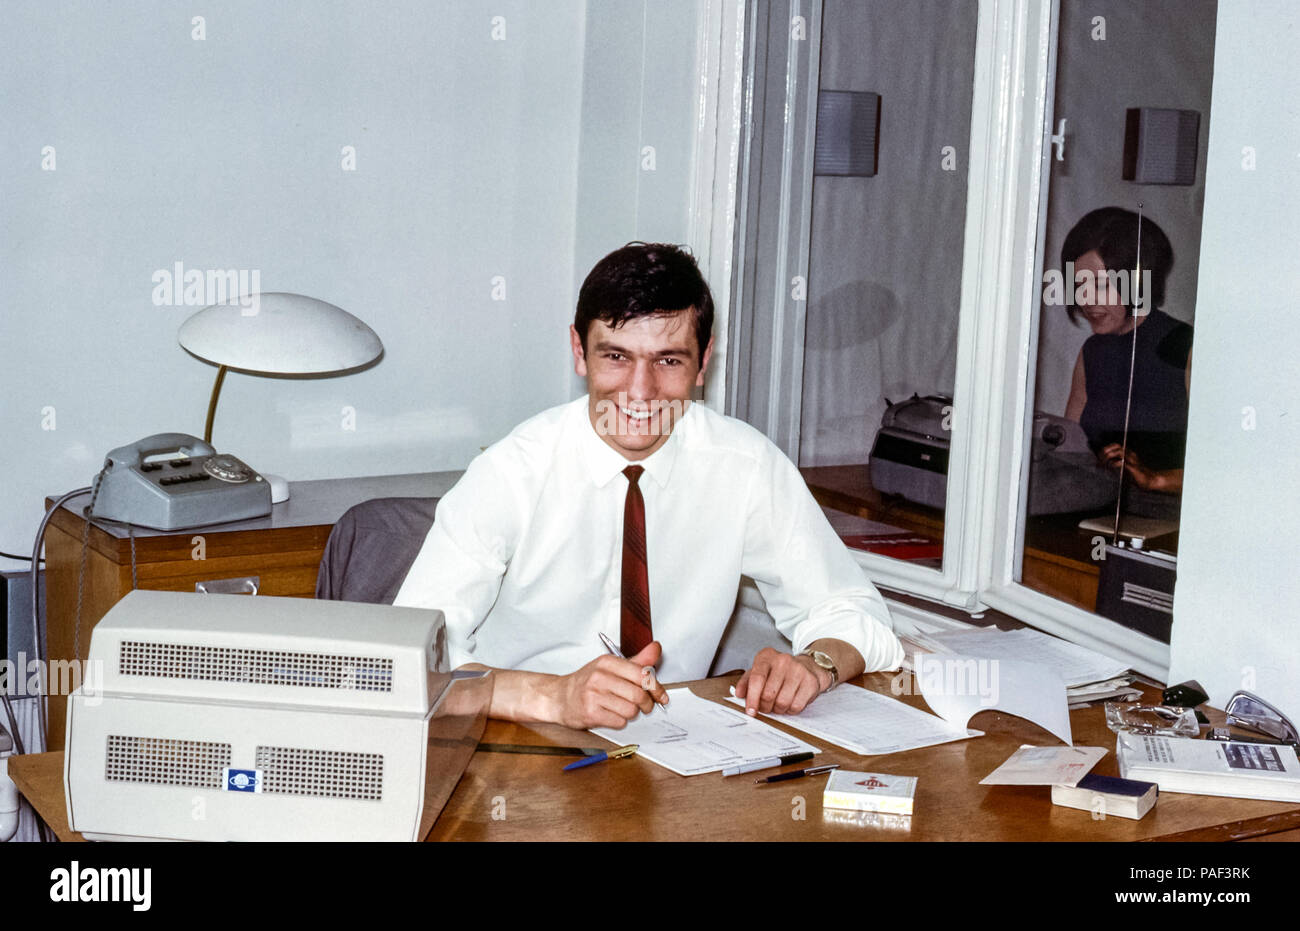 A Male Employee At A Desk With Old Fashioned Office Equipment In